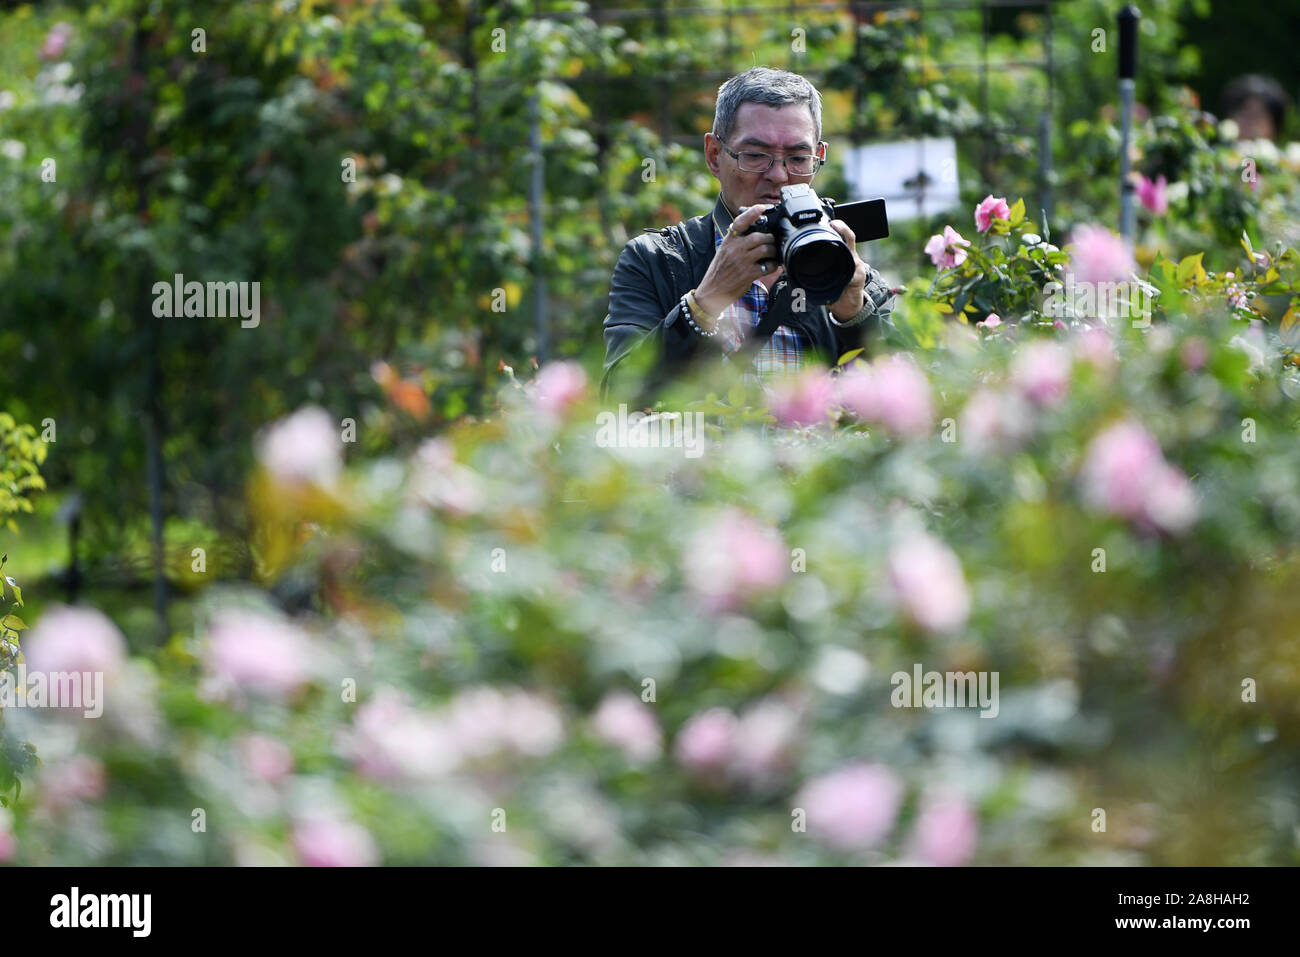 (191109) -- TAIPEI, Nov. 9, 2019 (Xinhua) -- A visitor takes photos of roses during a rose show at Taipei Expo Park in Taipei, southeast China's Taiwan, Nov. 9, 2019. The rose show, with nearly 3,000 roses of different varieties, opened here on Saturday. (Xinhua/Chen Bin) Stock Photo